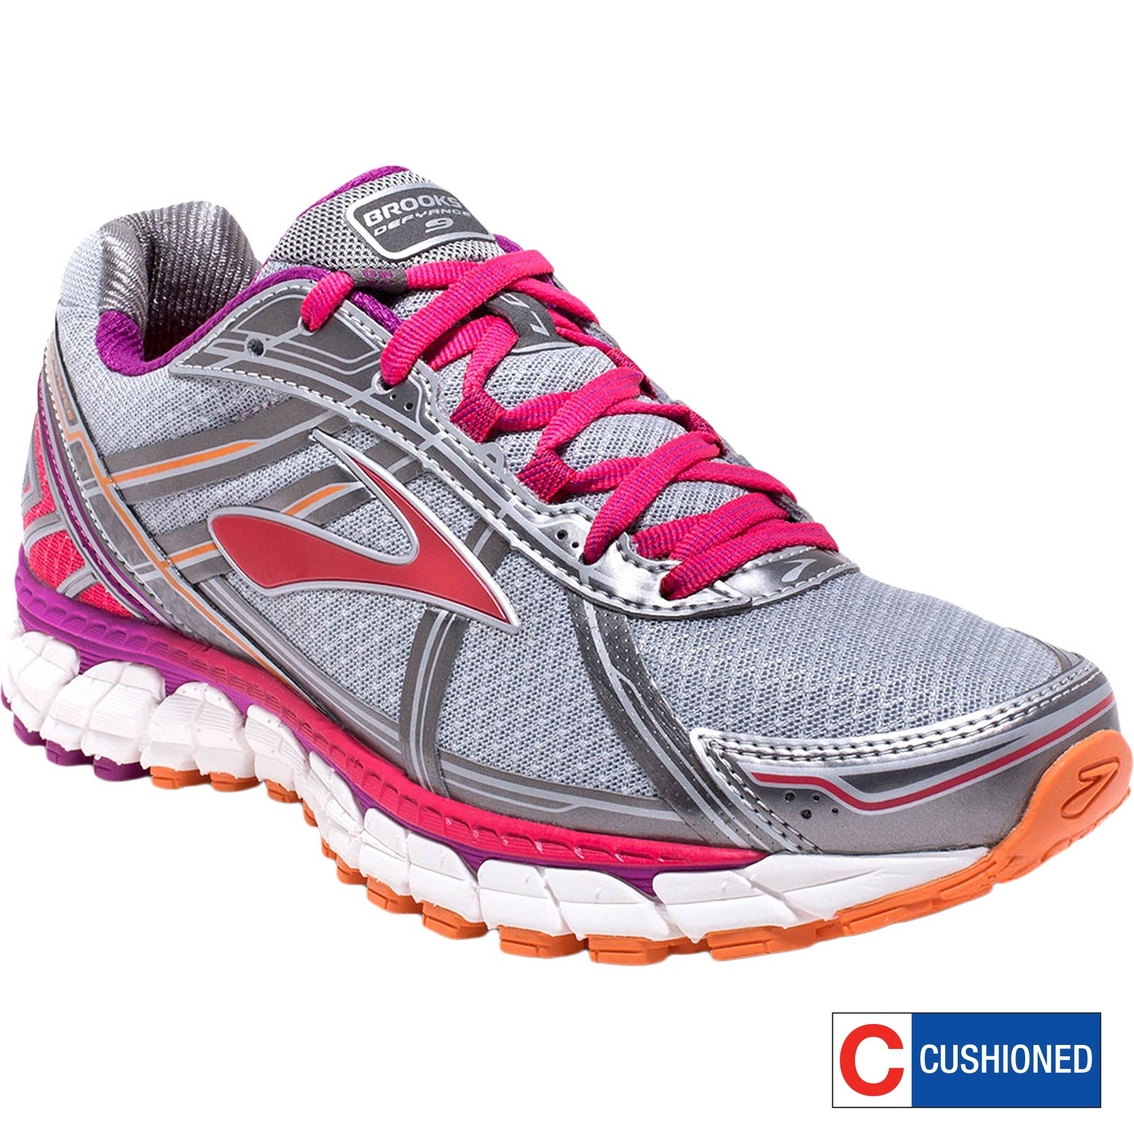 brooks defyance 2 womens red